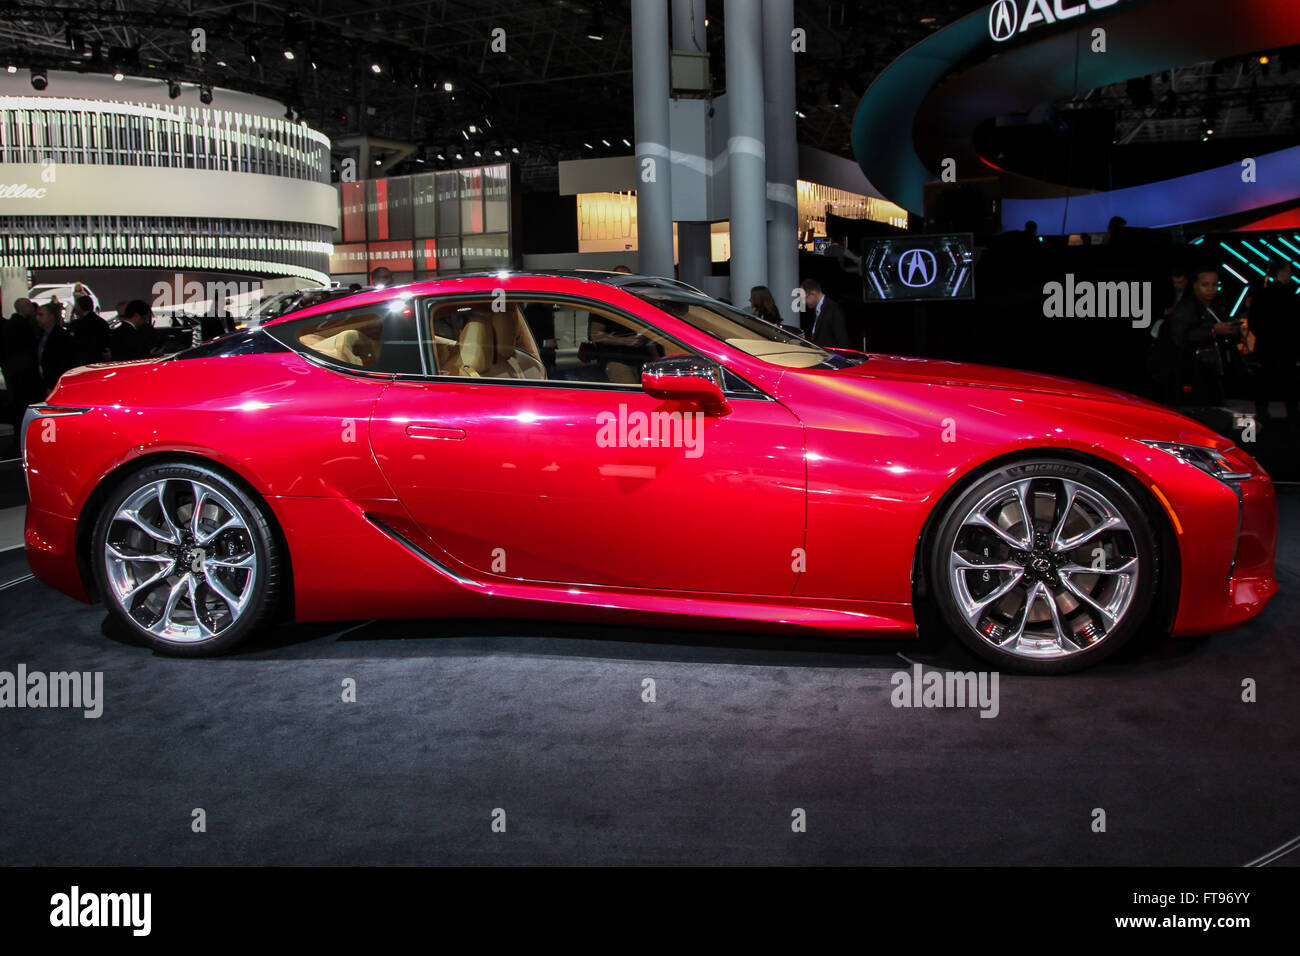 Manhattan, New York, USA. 23rd Mar, 2016. A Lexus LC 500 shown at the New York International Auto Show 2016, at the Jacob Javits Center. This was Press Preview Day one of NYIAS, and the Trade Show will be open to the public for ten days, March 25th through April 3rd. Credit:  Miro Vrlik Photography/Alamy Live News Stock Photo